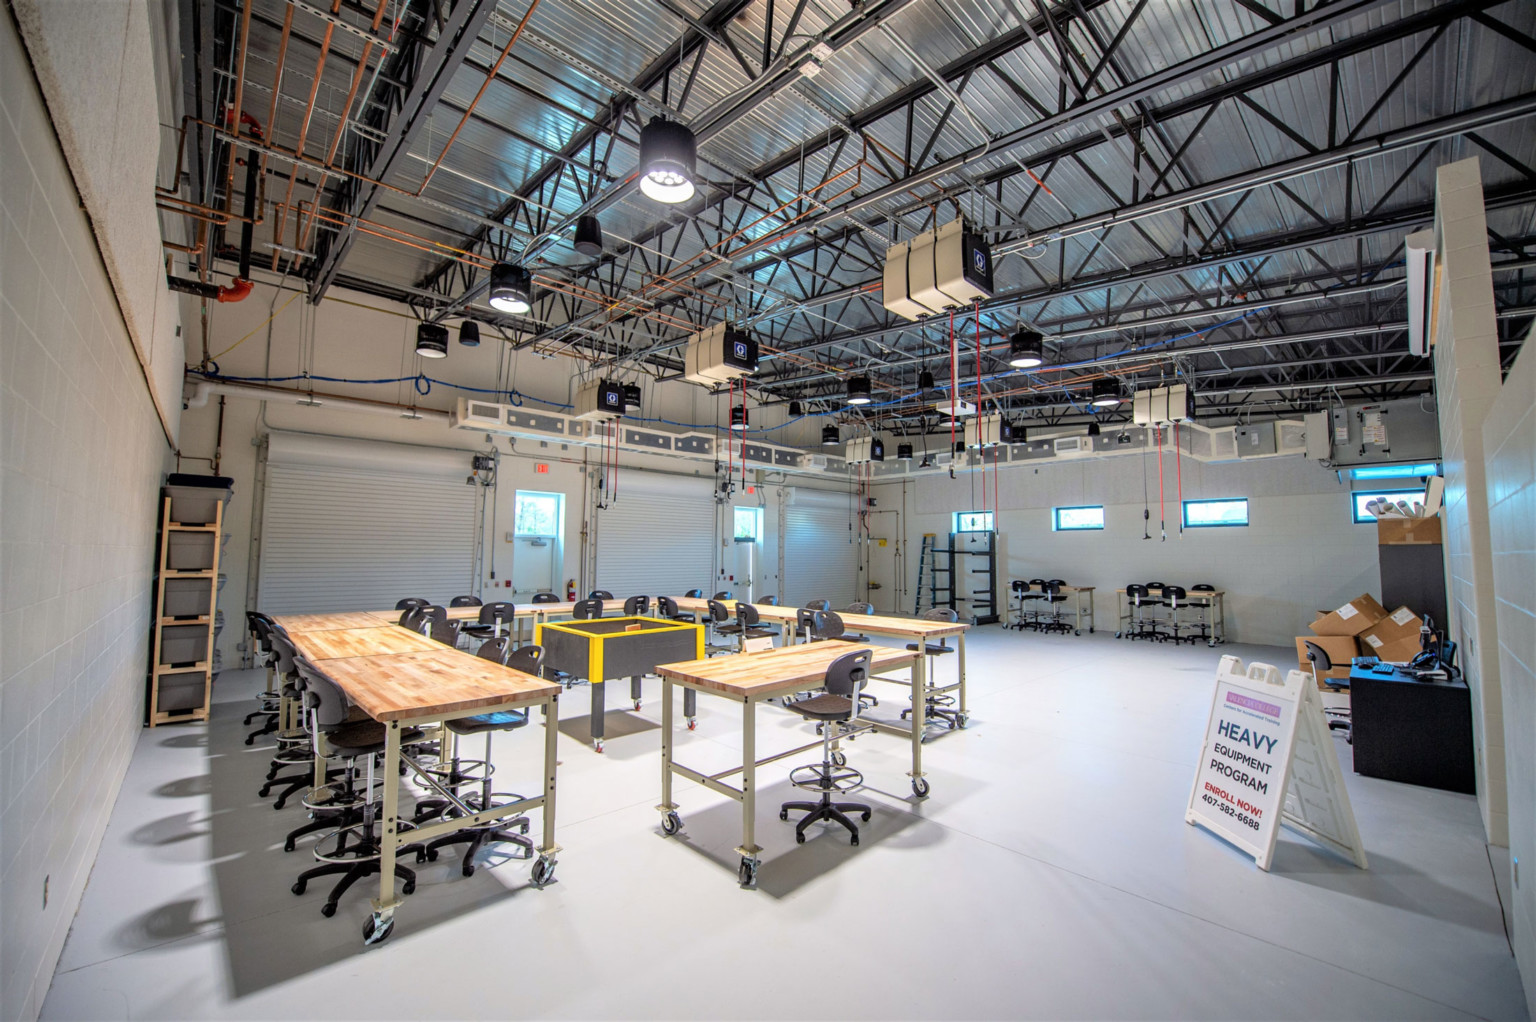 Valencia College Center for Advanced Training Facility, a double height room with exposed structural beams and work benches